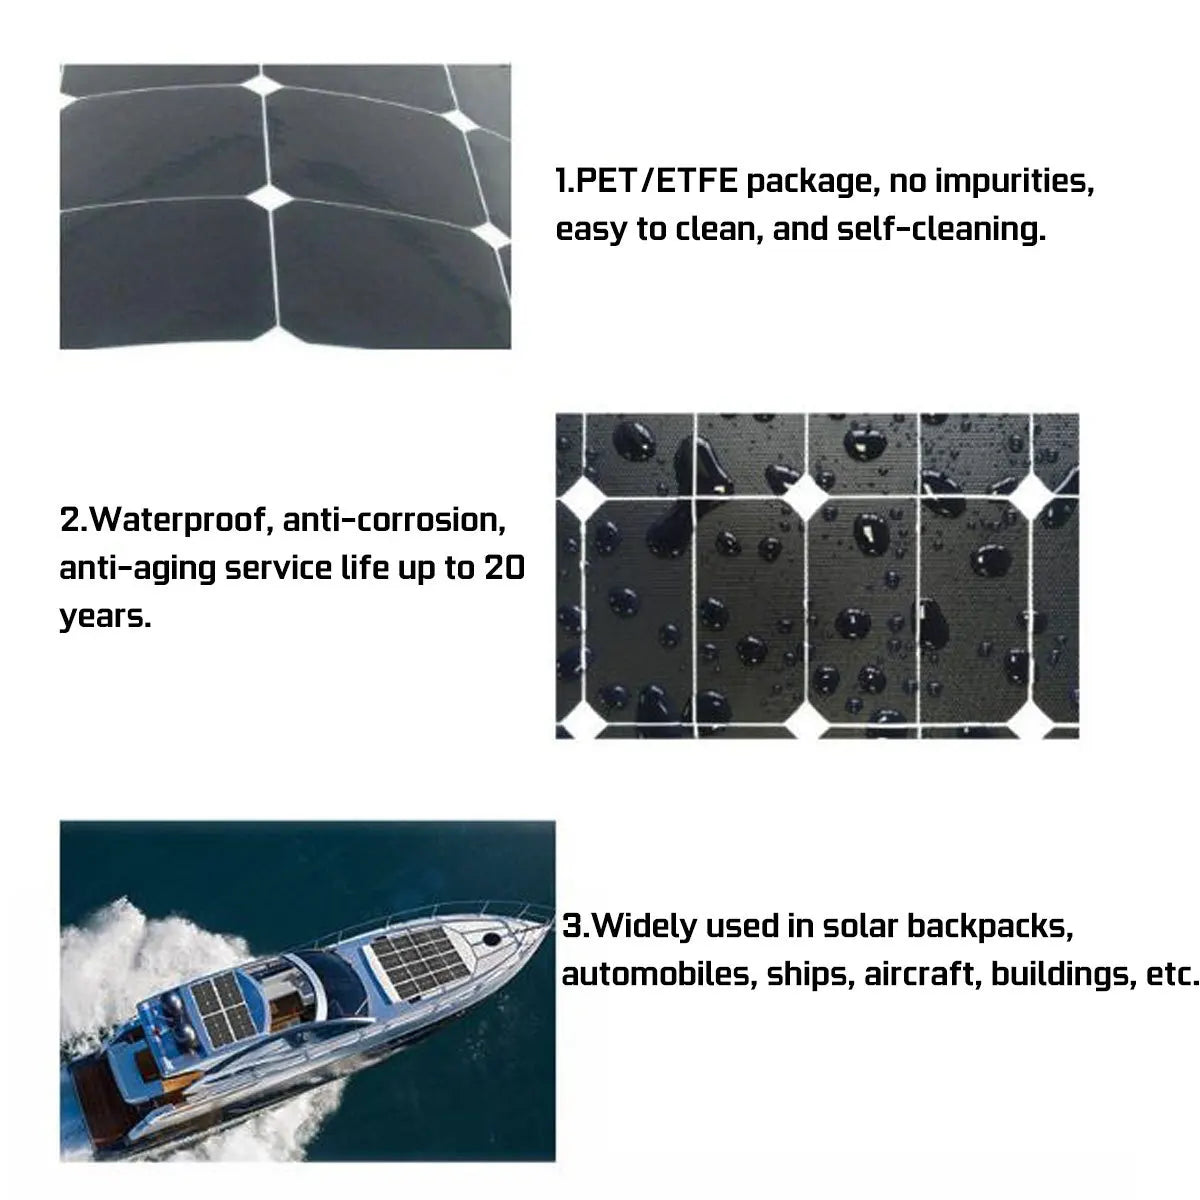 12V Solar Panel Charging Water Pump Set, Self-cleaning, waterproof, anti-corrosive package for long-term use in various applications including solar-powered devices.